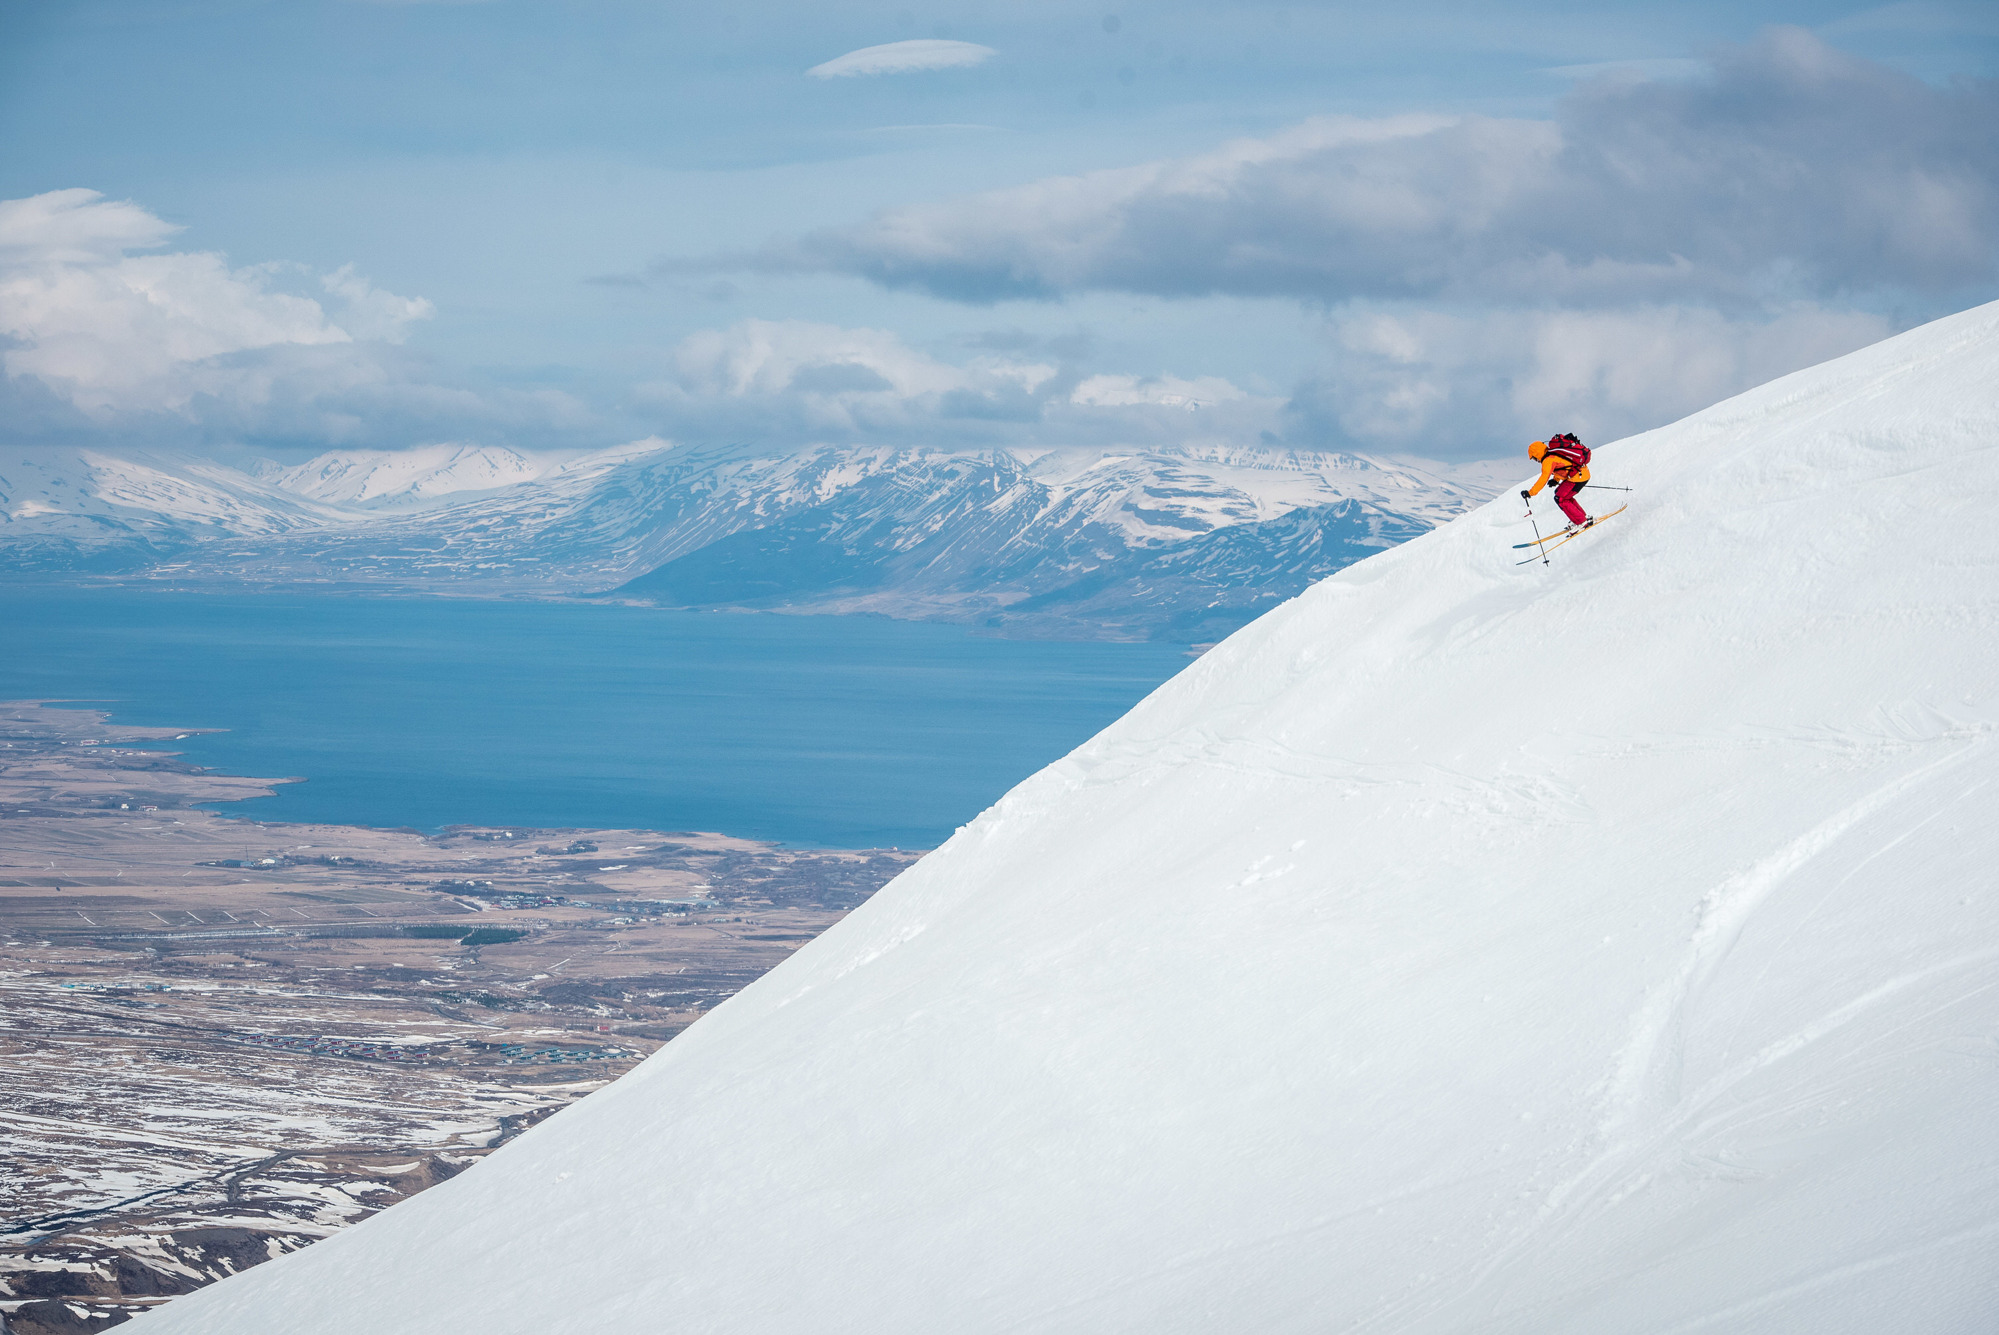 Backcountry skiing in Iceland